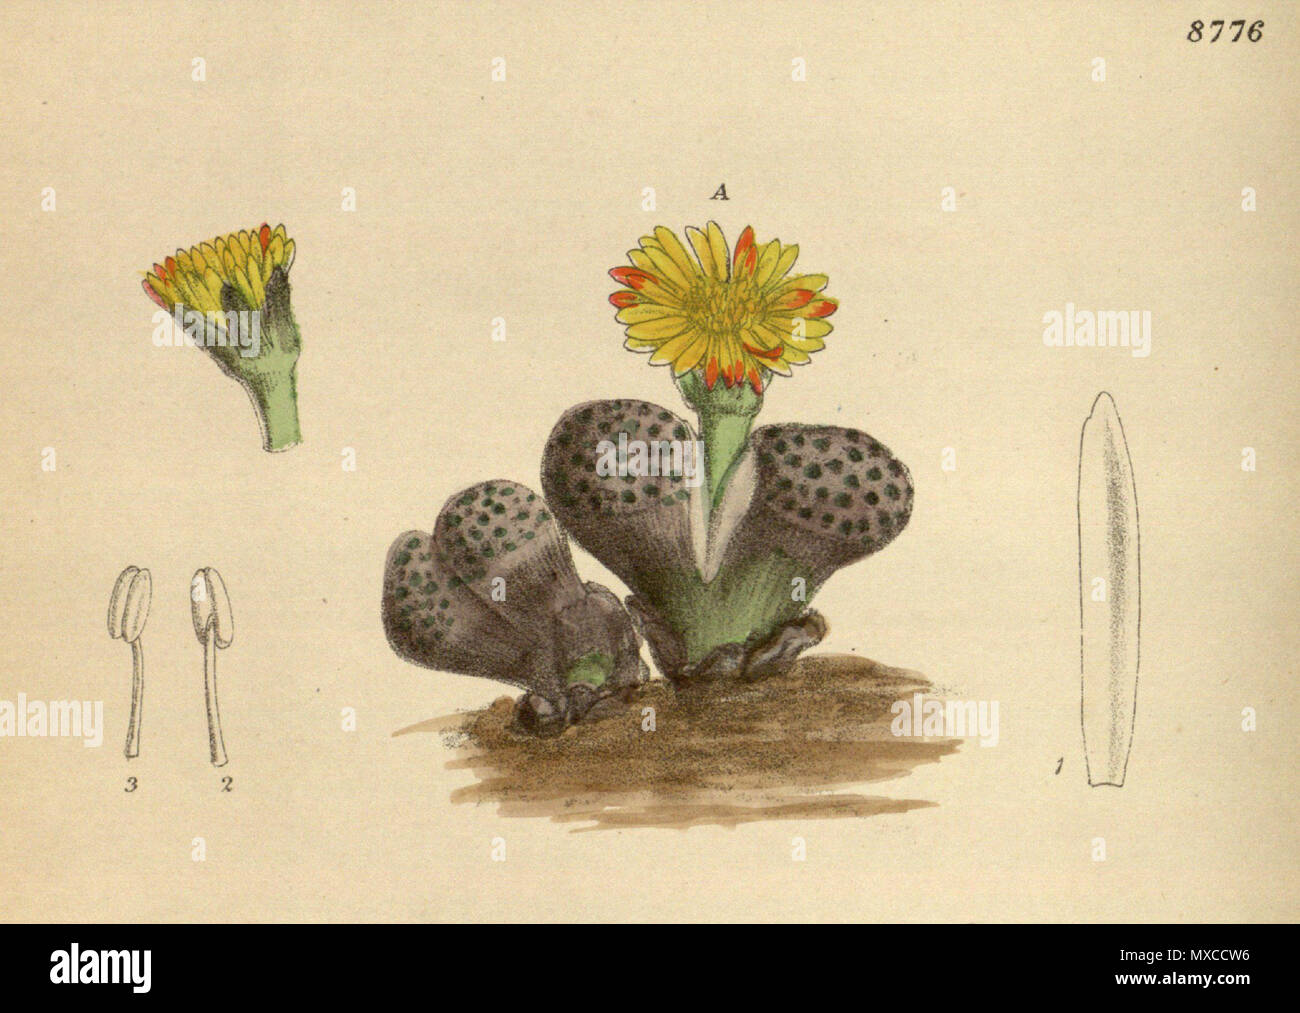 . Mesembryanthemum fulviceps (= Lithops fulviceps), Aizoaceae . 1918. M.S. del., J.N.Fitch lith. 413 Mesembryanthemum fulviceps 144-8776A Stock Photo